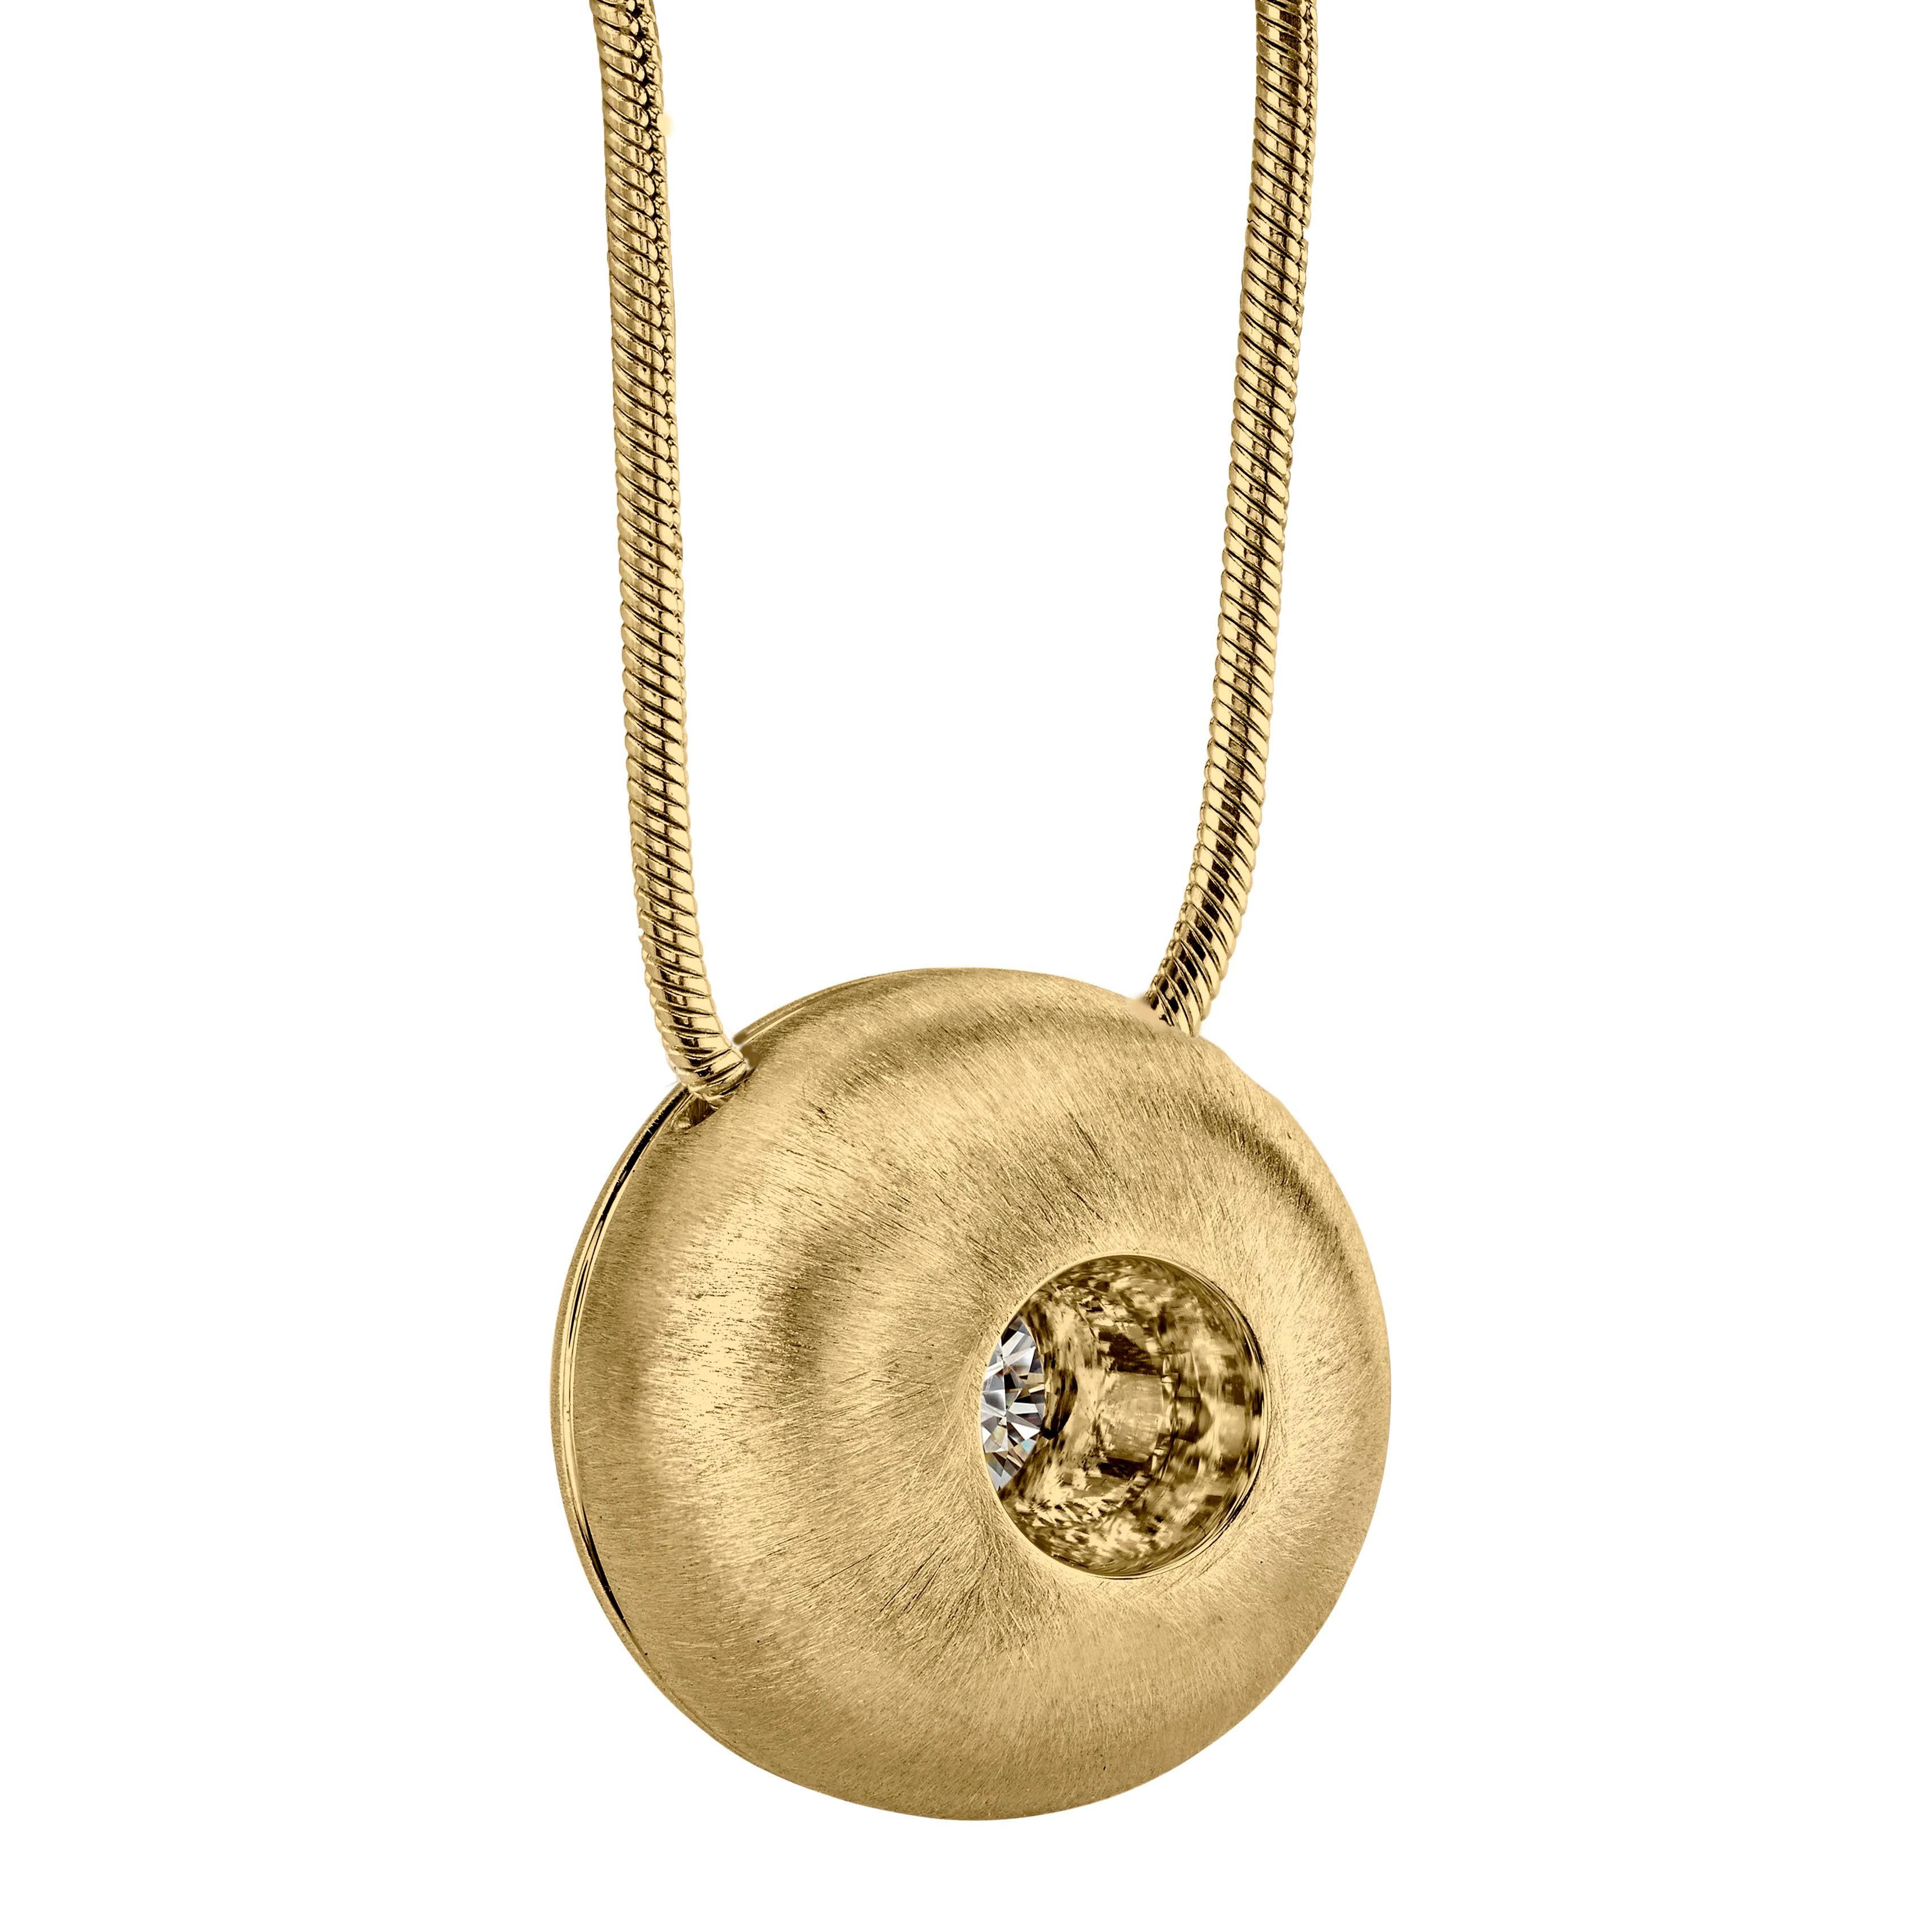 This White Sapphire in Large Yellow Gold Dome Pendant, part of our Power Series, is a symbolic design inspired by the idea of looking inward, the notion of what a person needs is already inside of them. The clean and classic lines are imaginative,